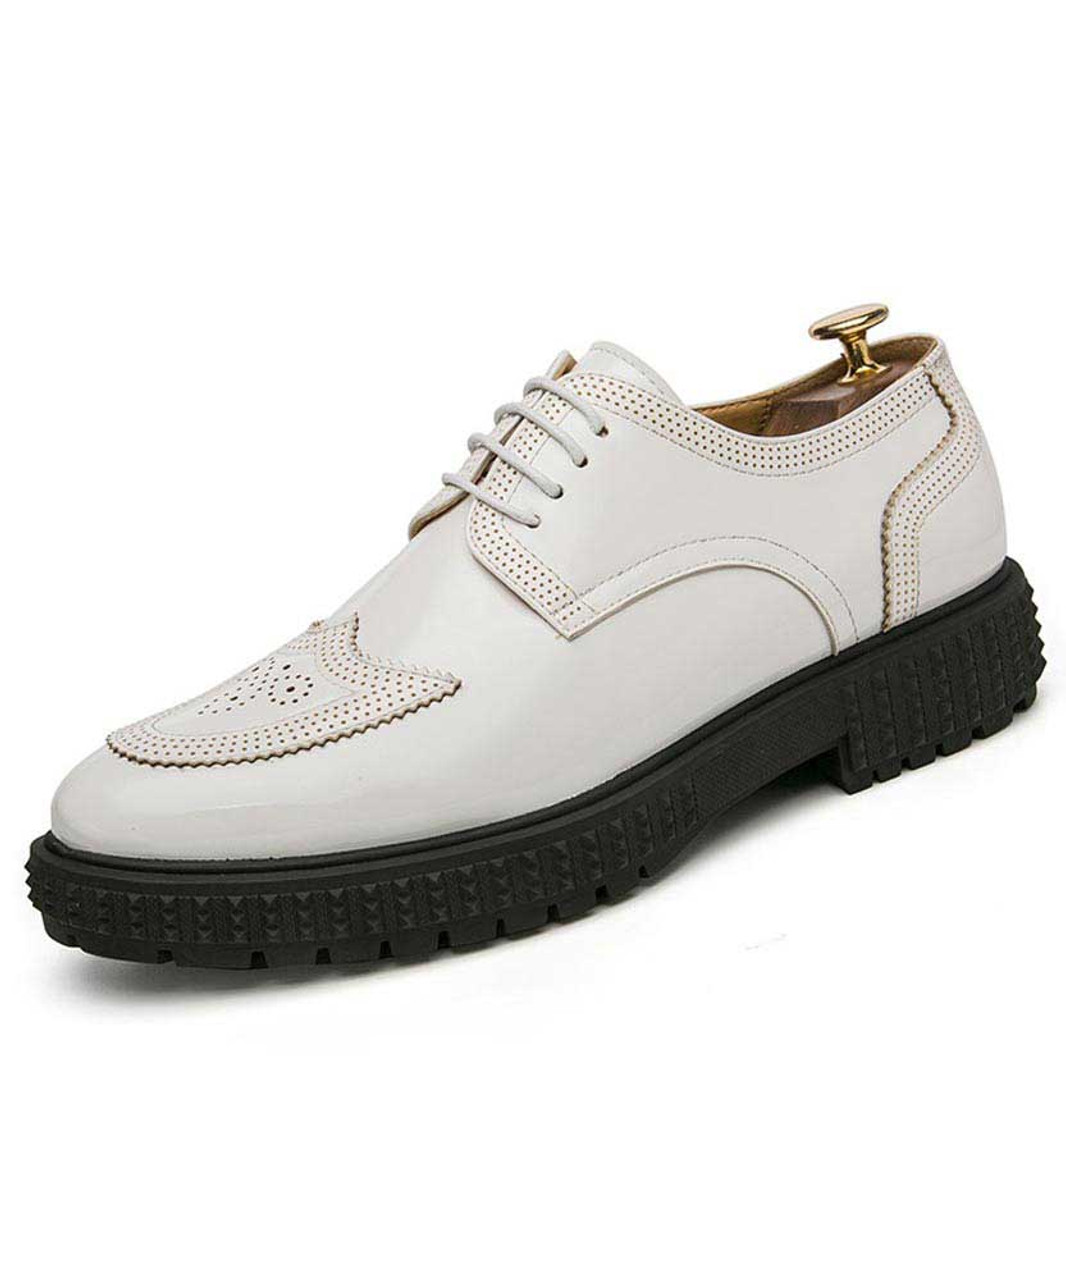 white patent leather dress shoes